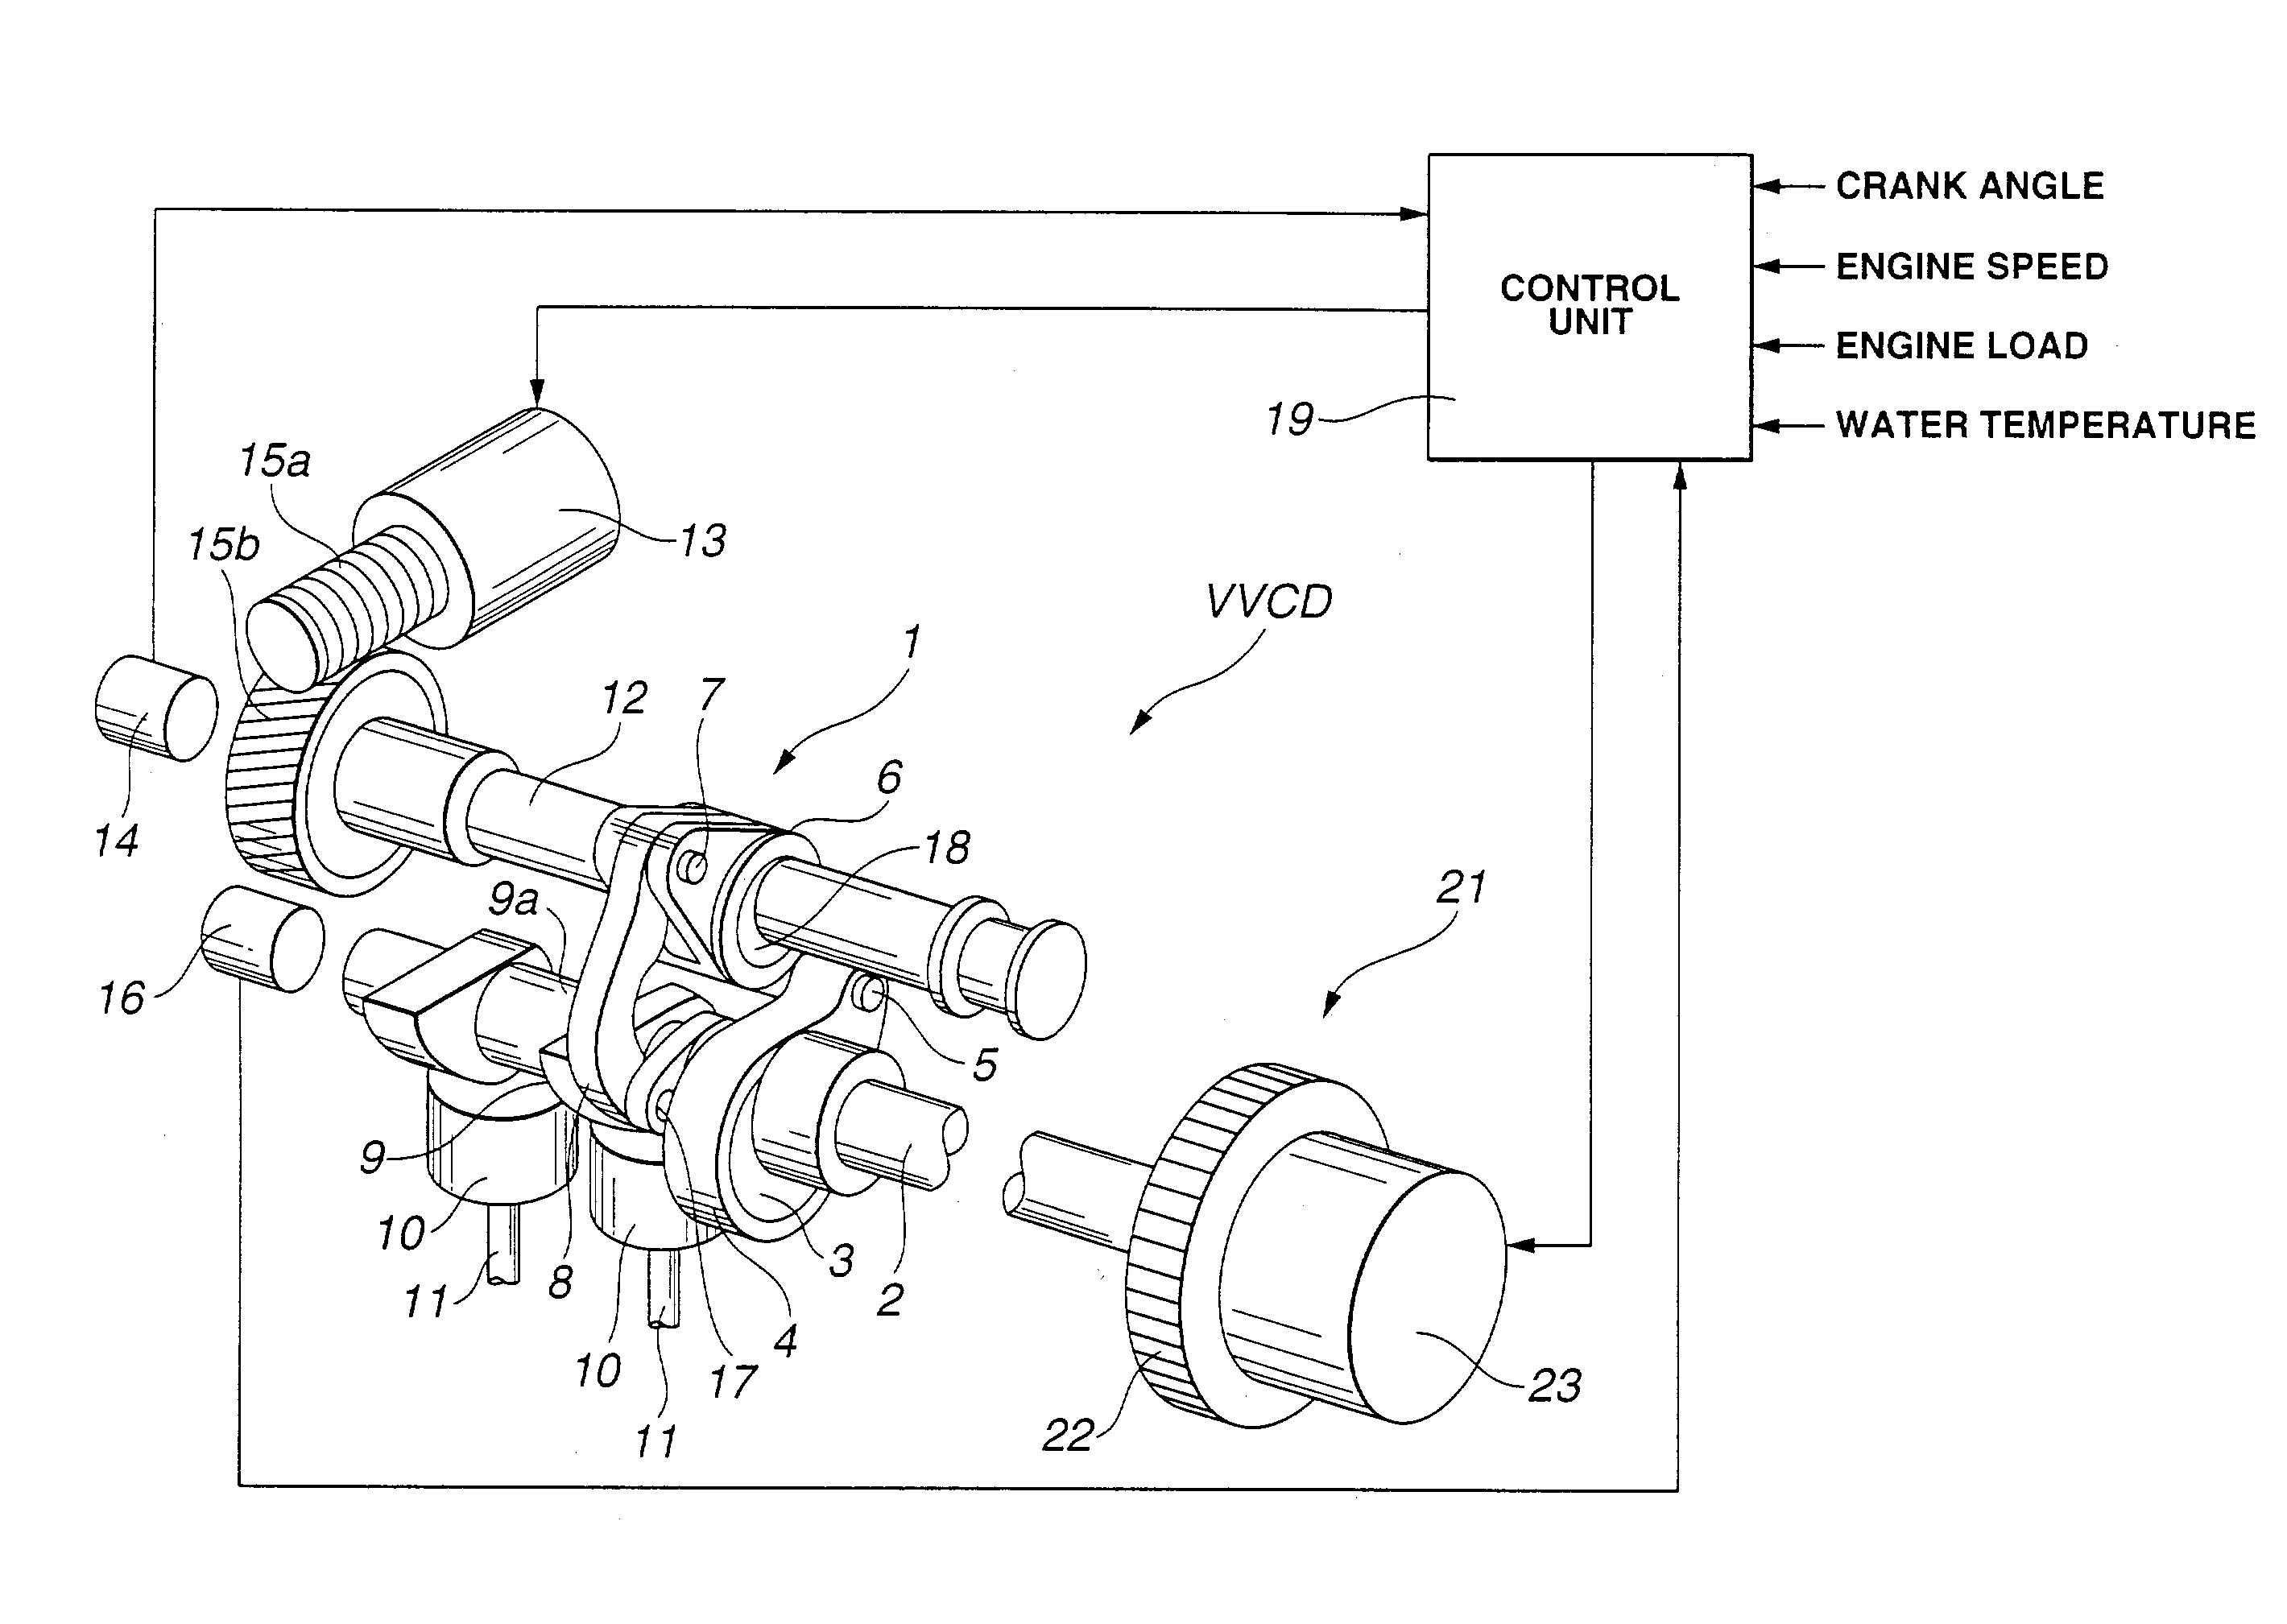 Internal combustion engine with variable valve control device